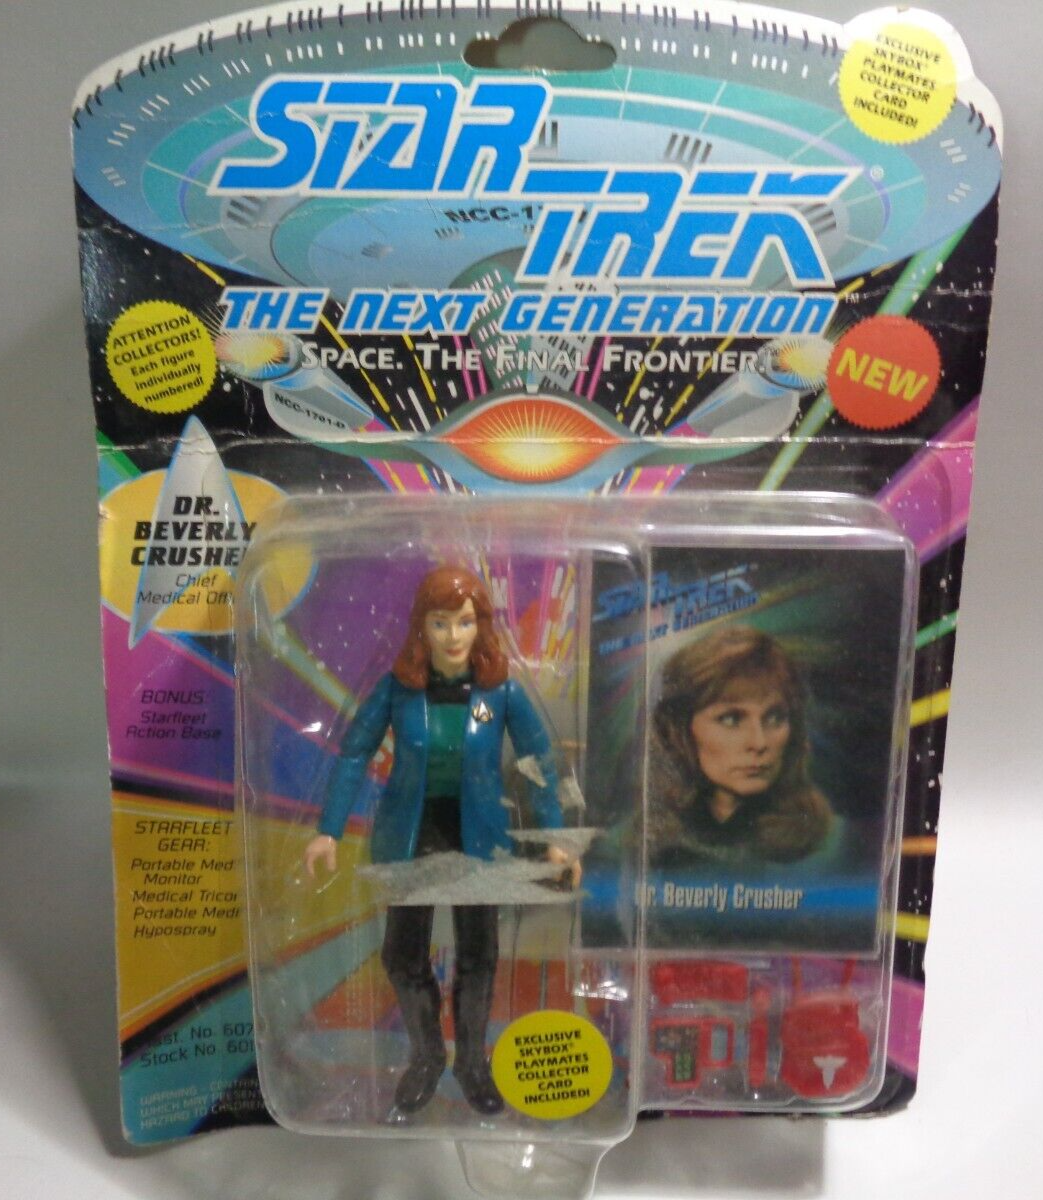 Primary image for Playmates Star Trek The Next Generation Dr. Beverly Crusher Action Figure